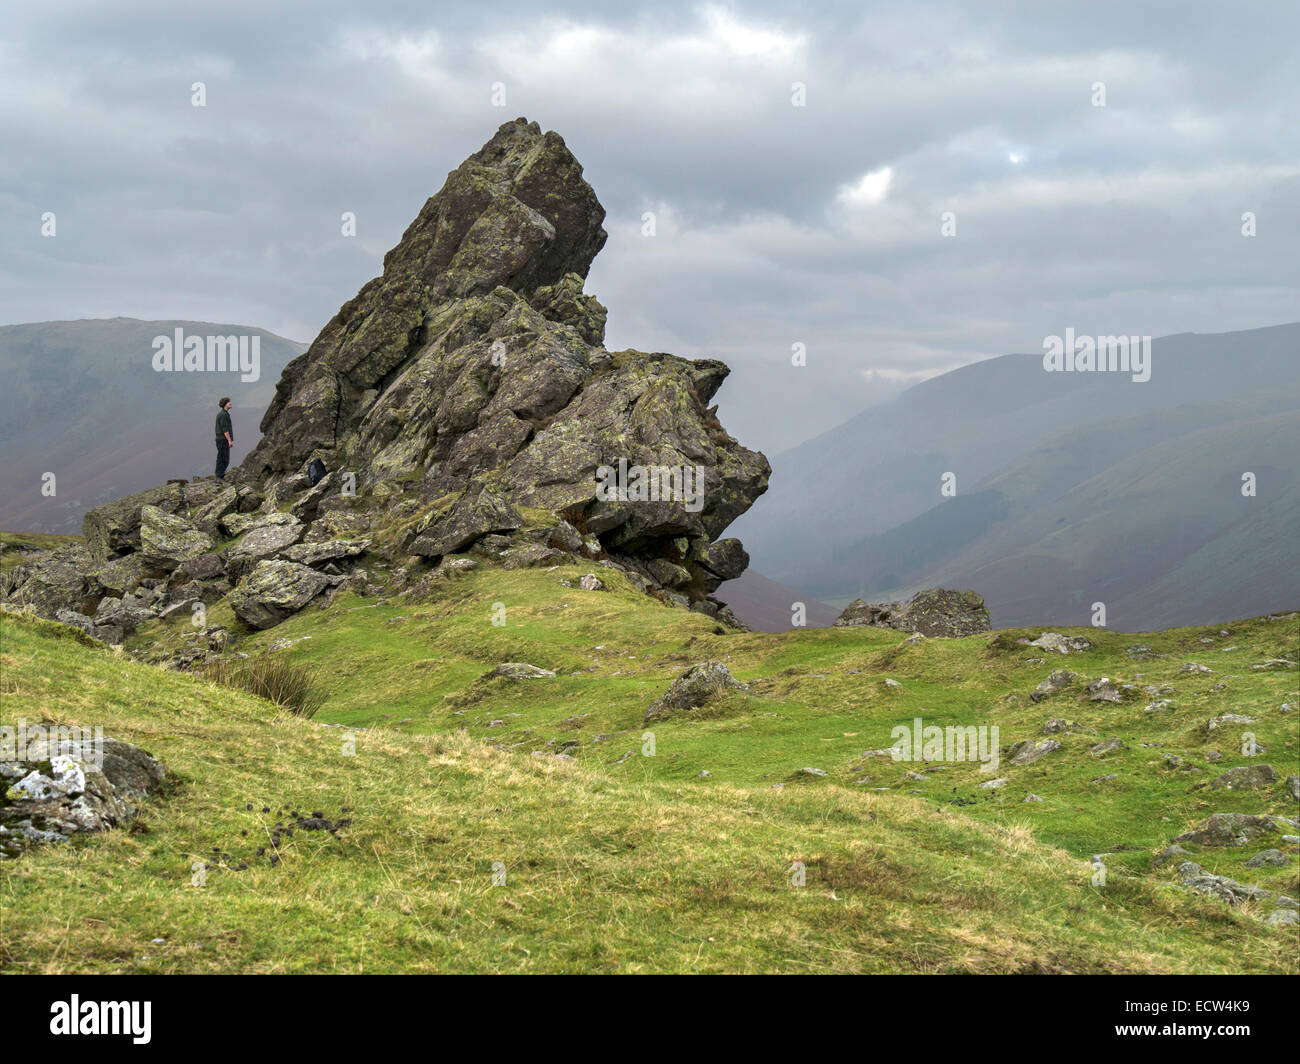 Hill walker admires 'Howitzer' rock formation on the summit of Helm Crag, Grasmere, Lake District, Cumbria, England, UK. Stock Photo